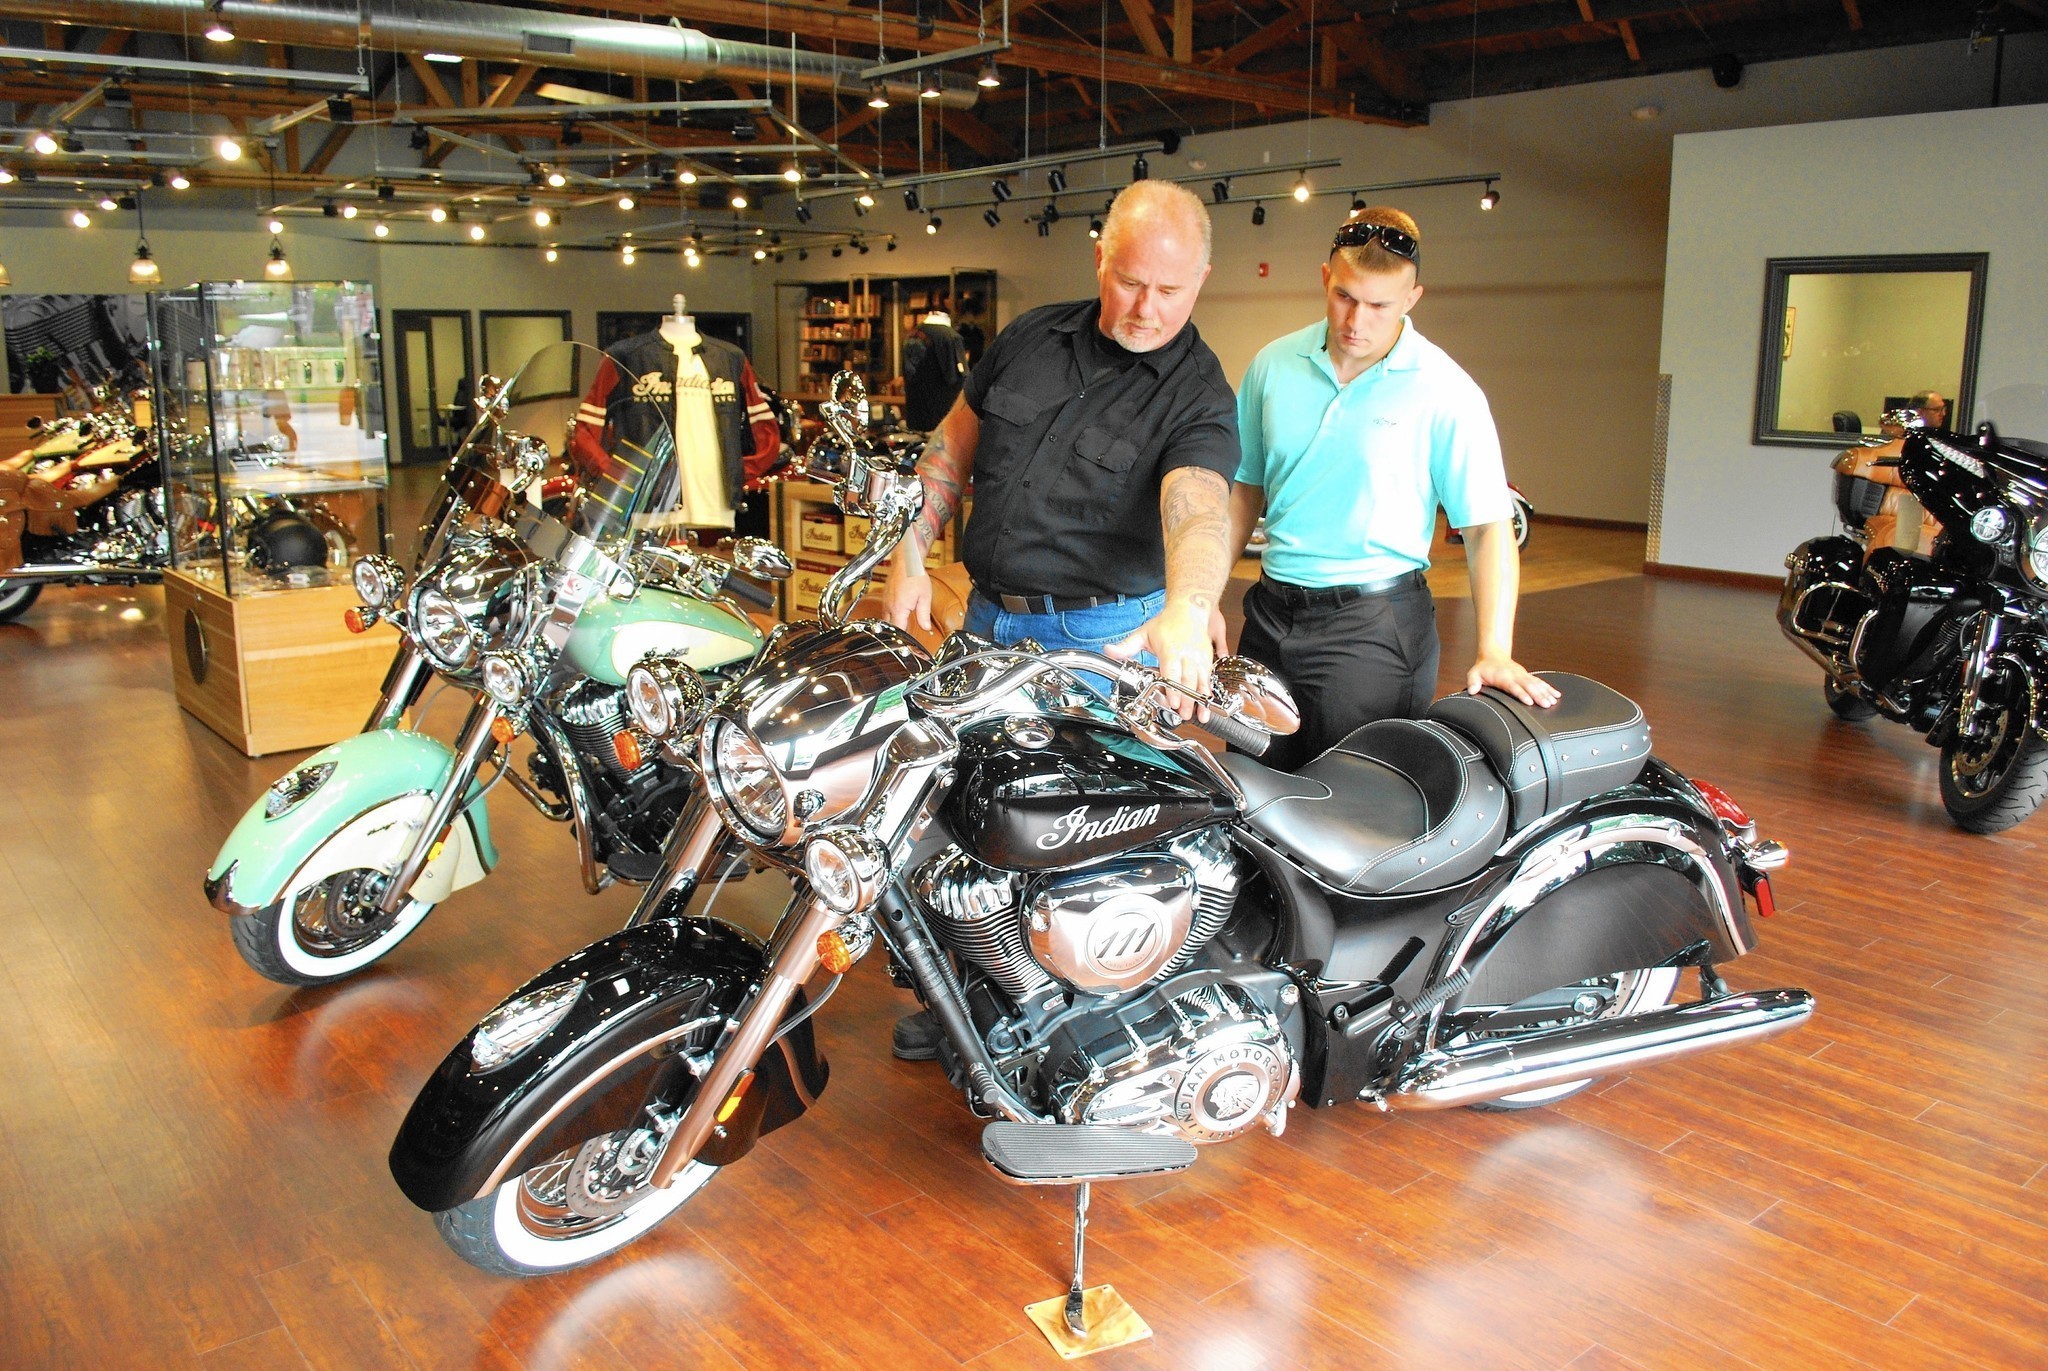 Libertyville made an exception, motorcycle dealership opens in downtown